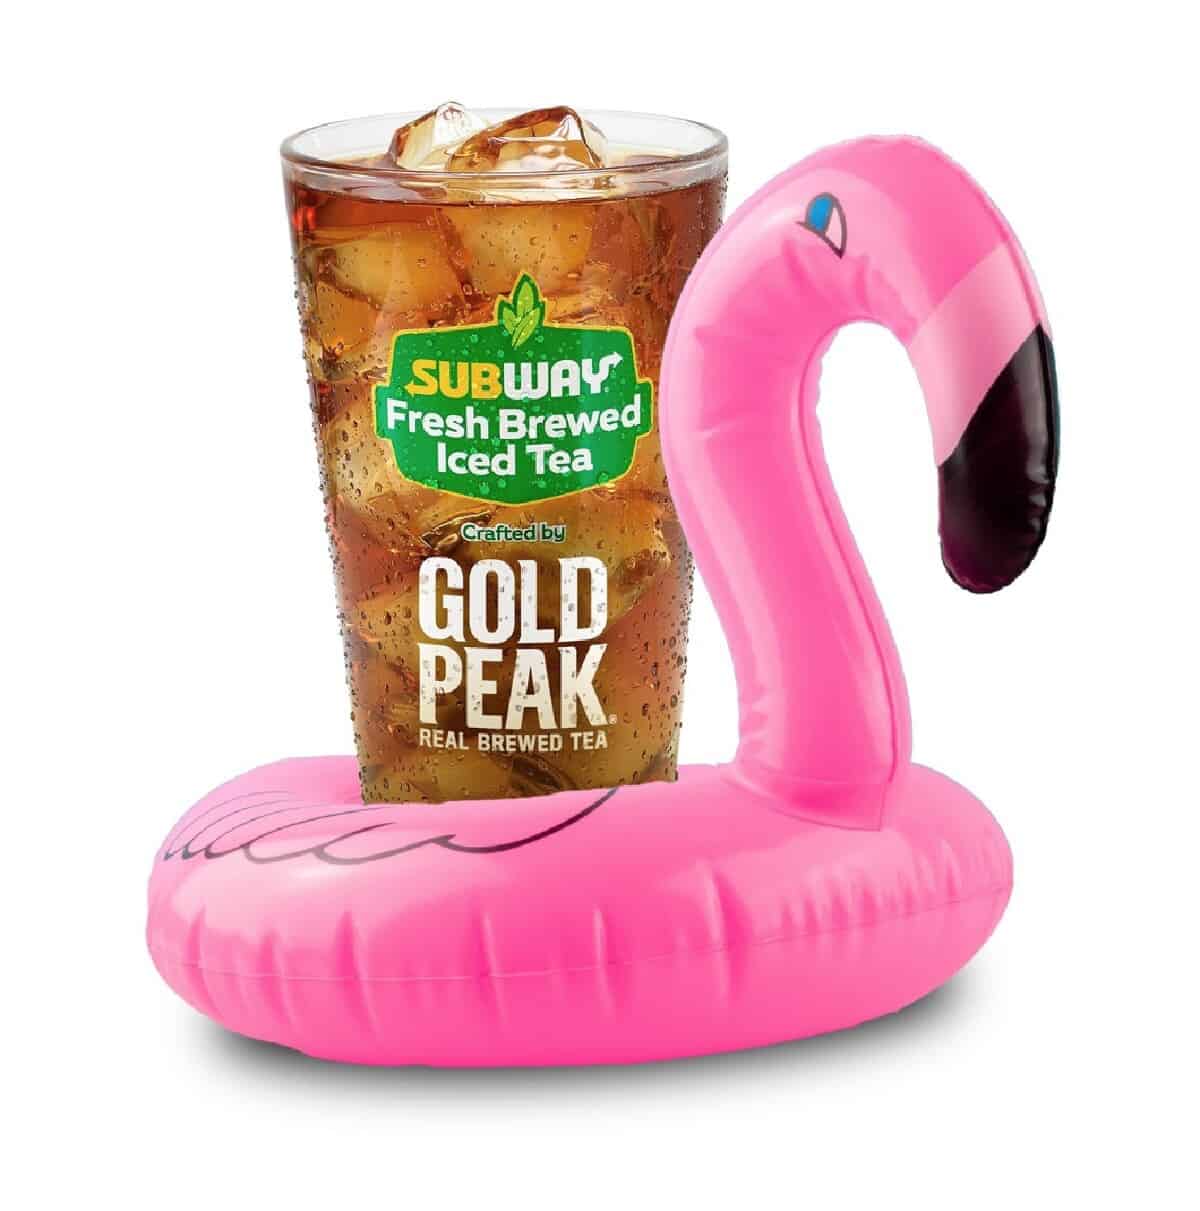 A large glass of Subway fresh brewed iced tea inside of a little pink flamingo inflatable toy.